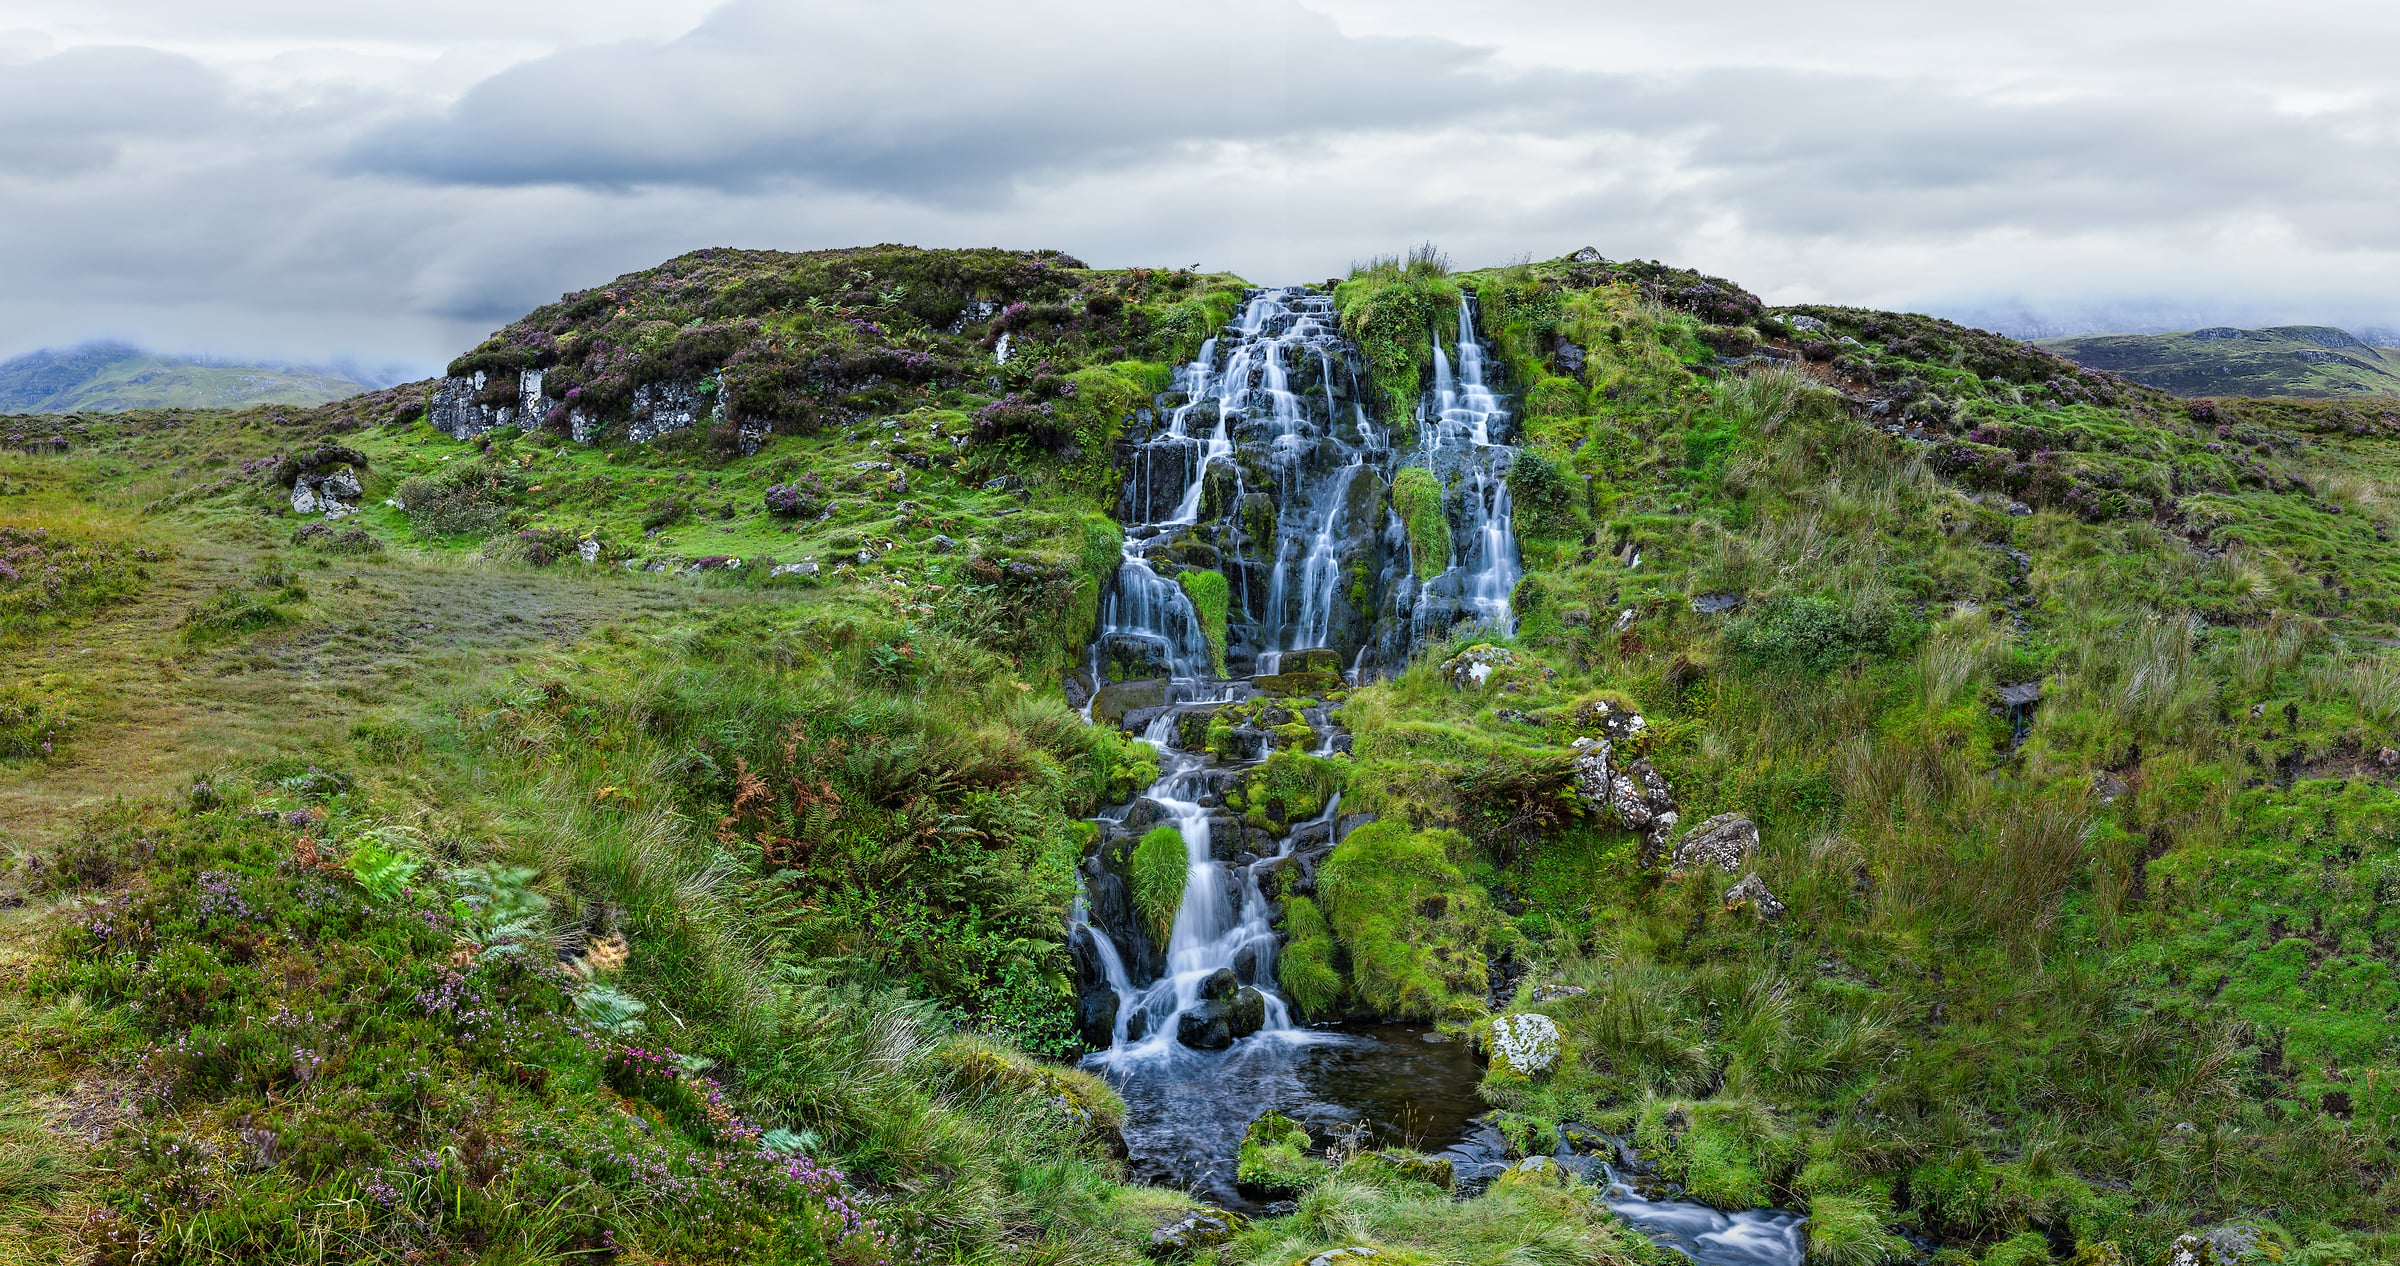 1,548 megapixels! A very high resolution, large-format VAST photo print of a waterfall in Scotland; photograph created by Scott Dimond in Isle of Skye, Scotland.